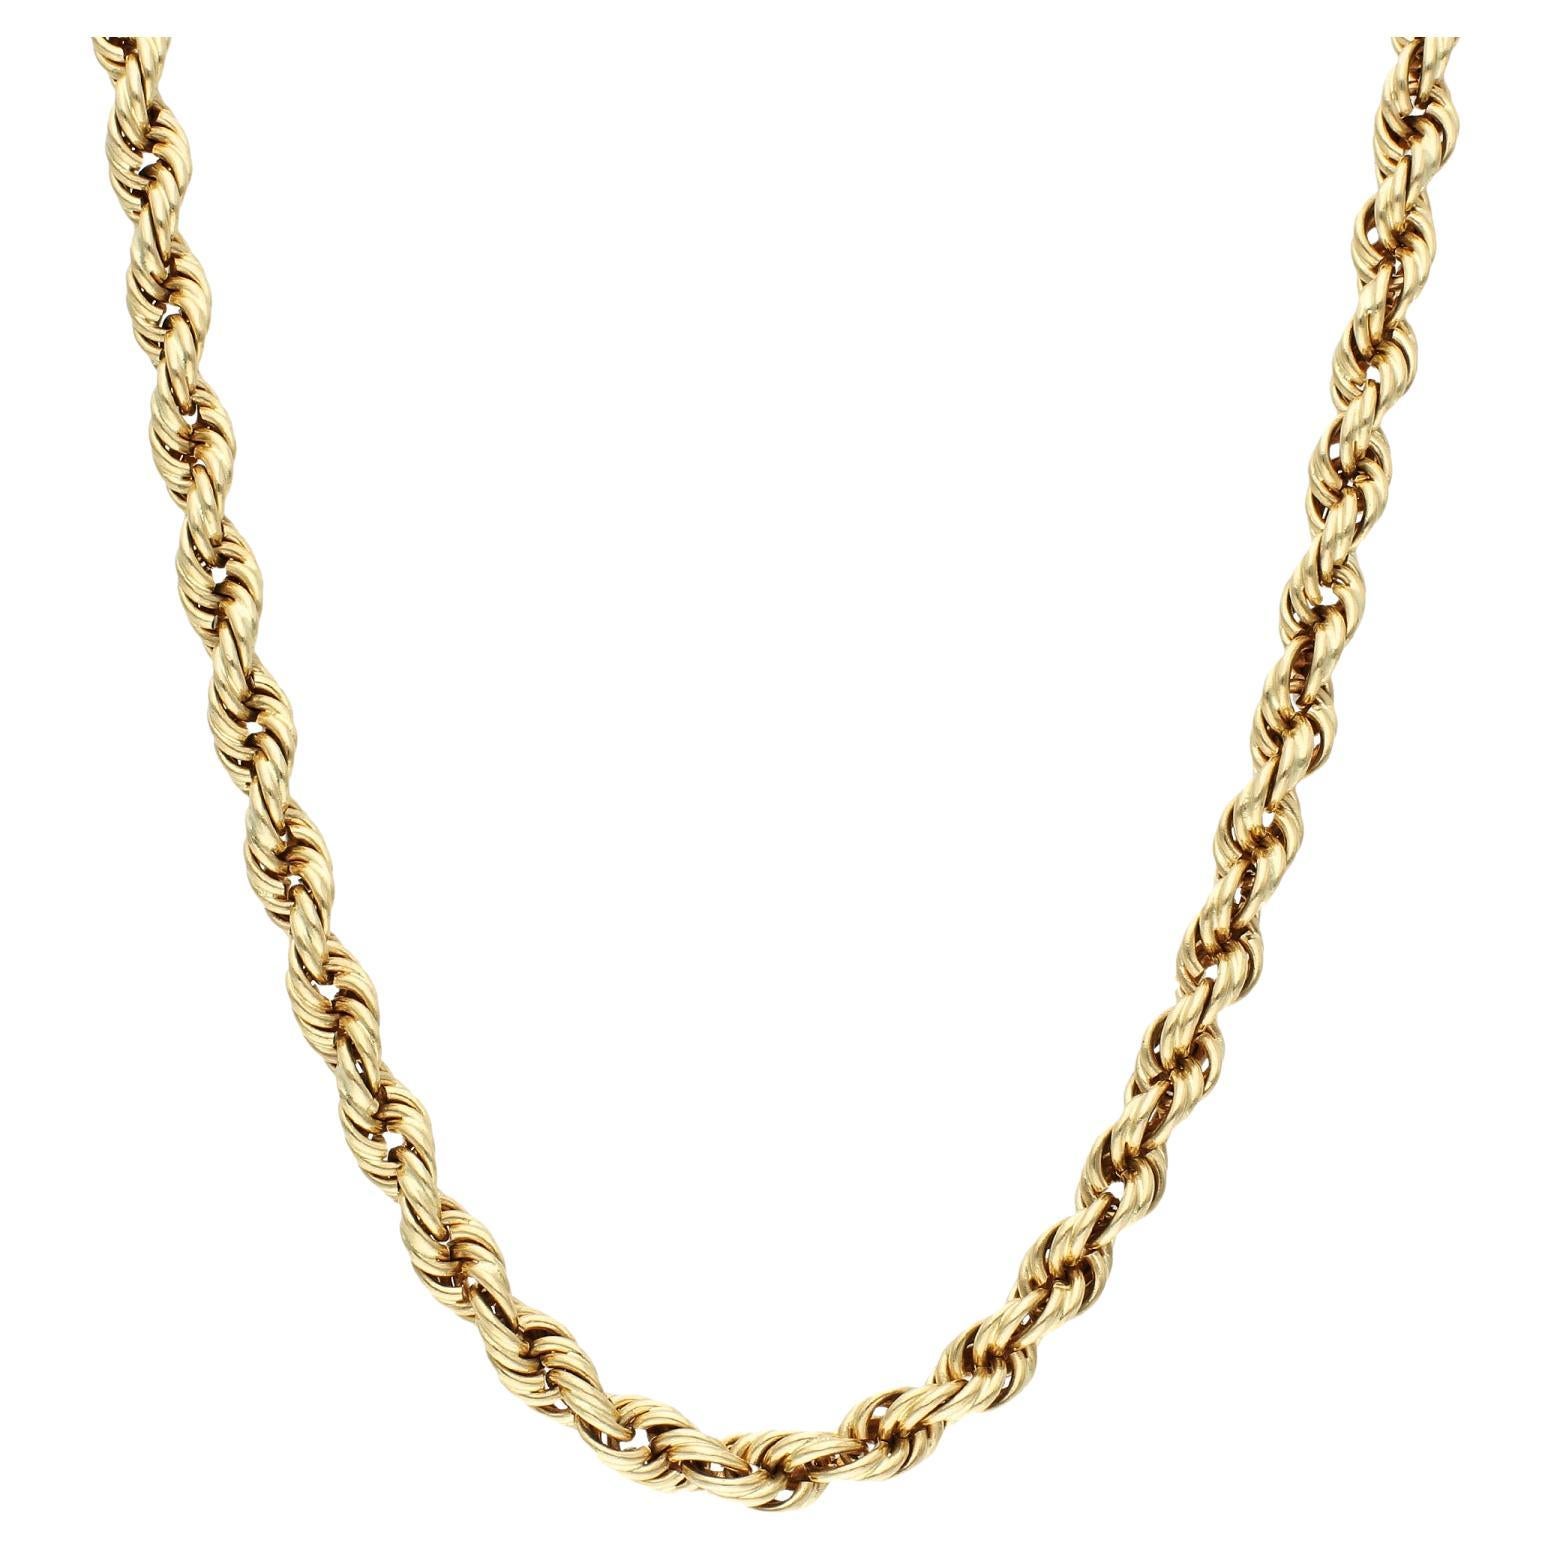  Solid 9ct Yellow Gold 28" Rope Chain 59.80 Grams